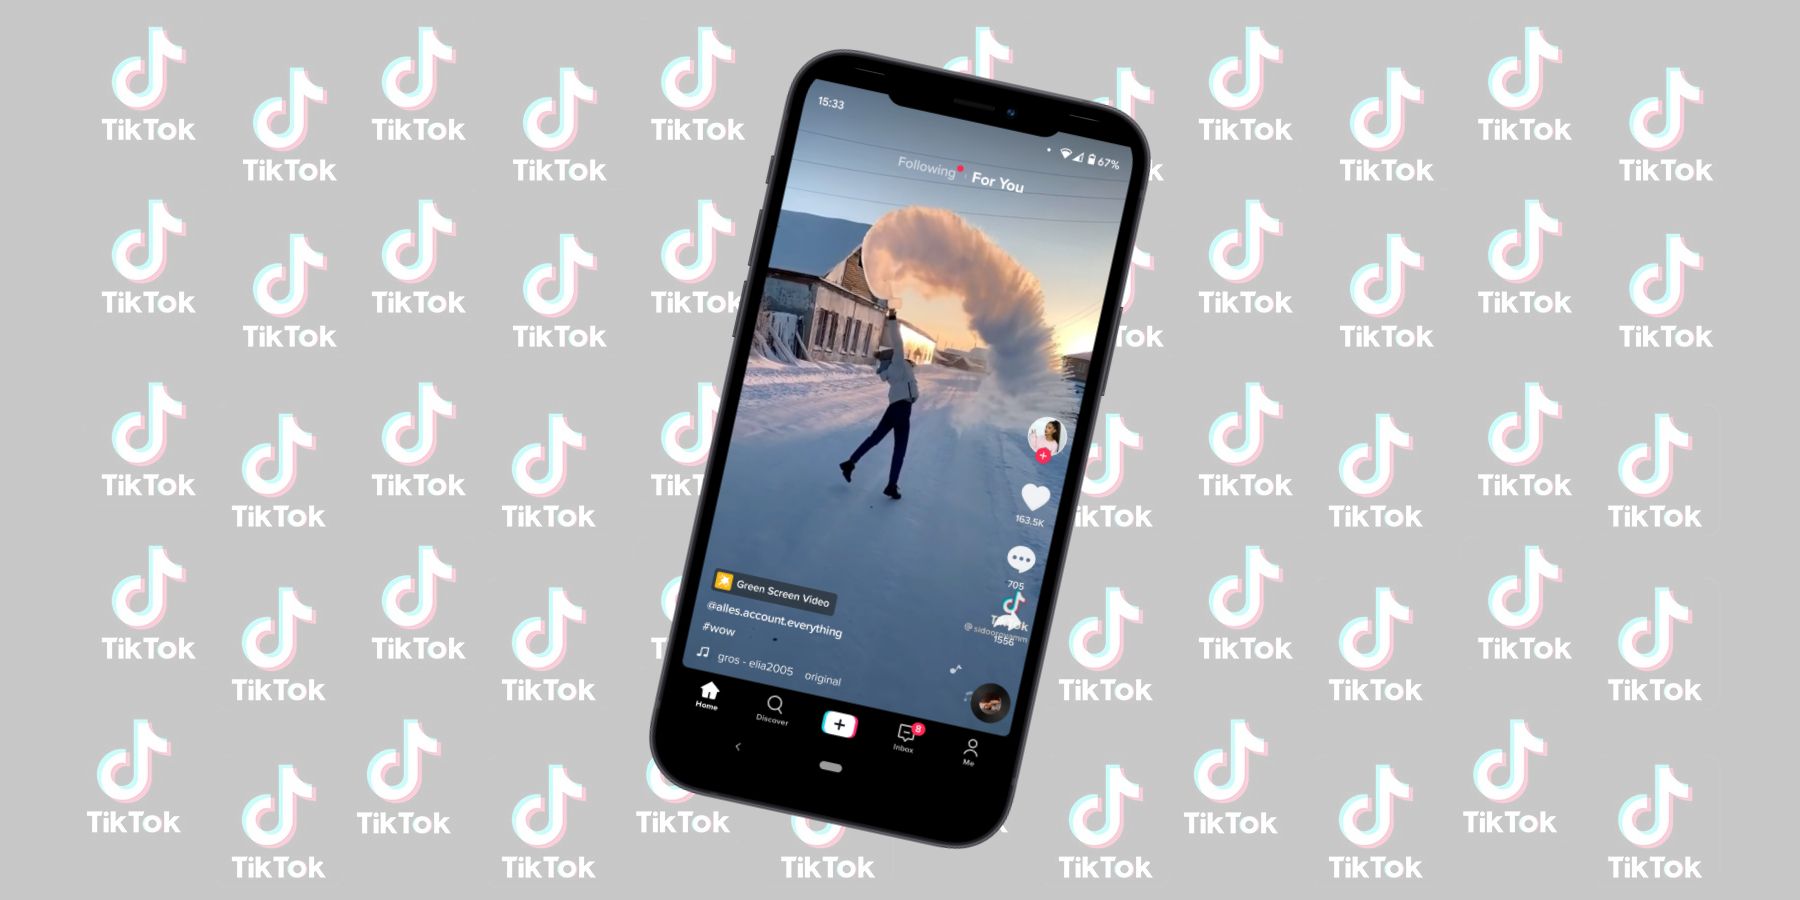 How To Let Other People Save Your TikTok Videos